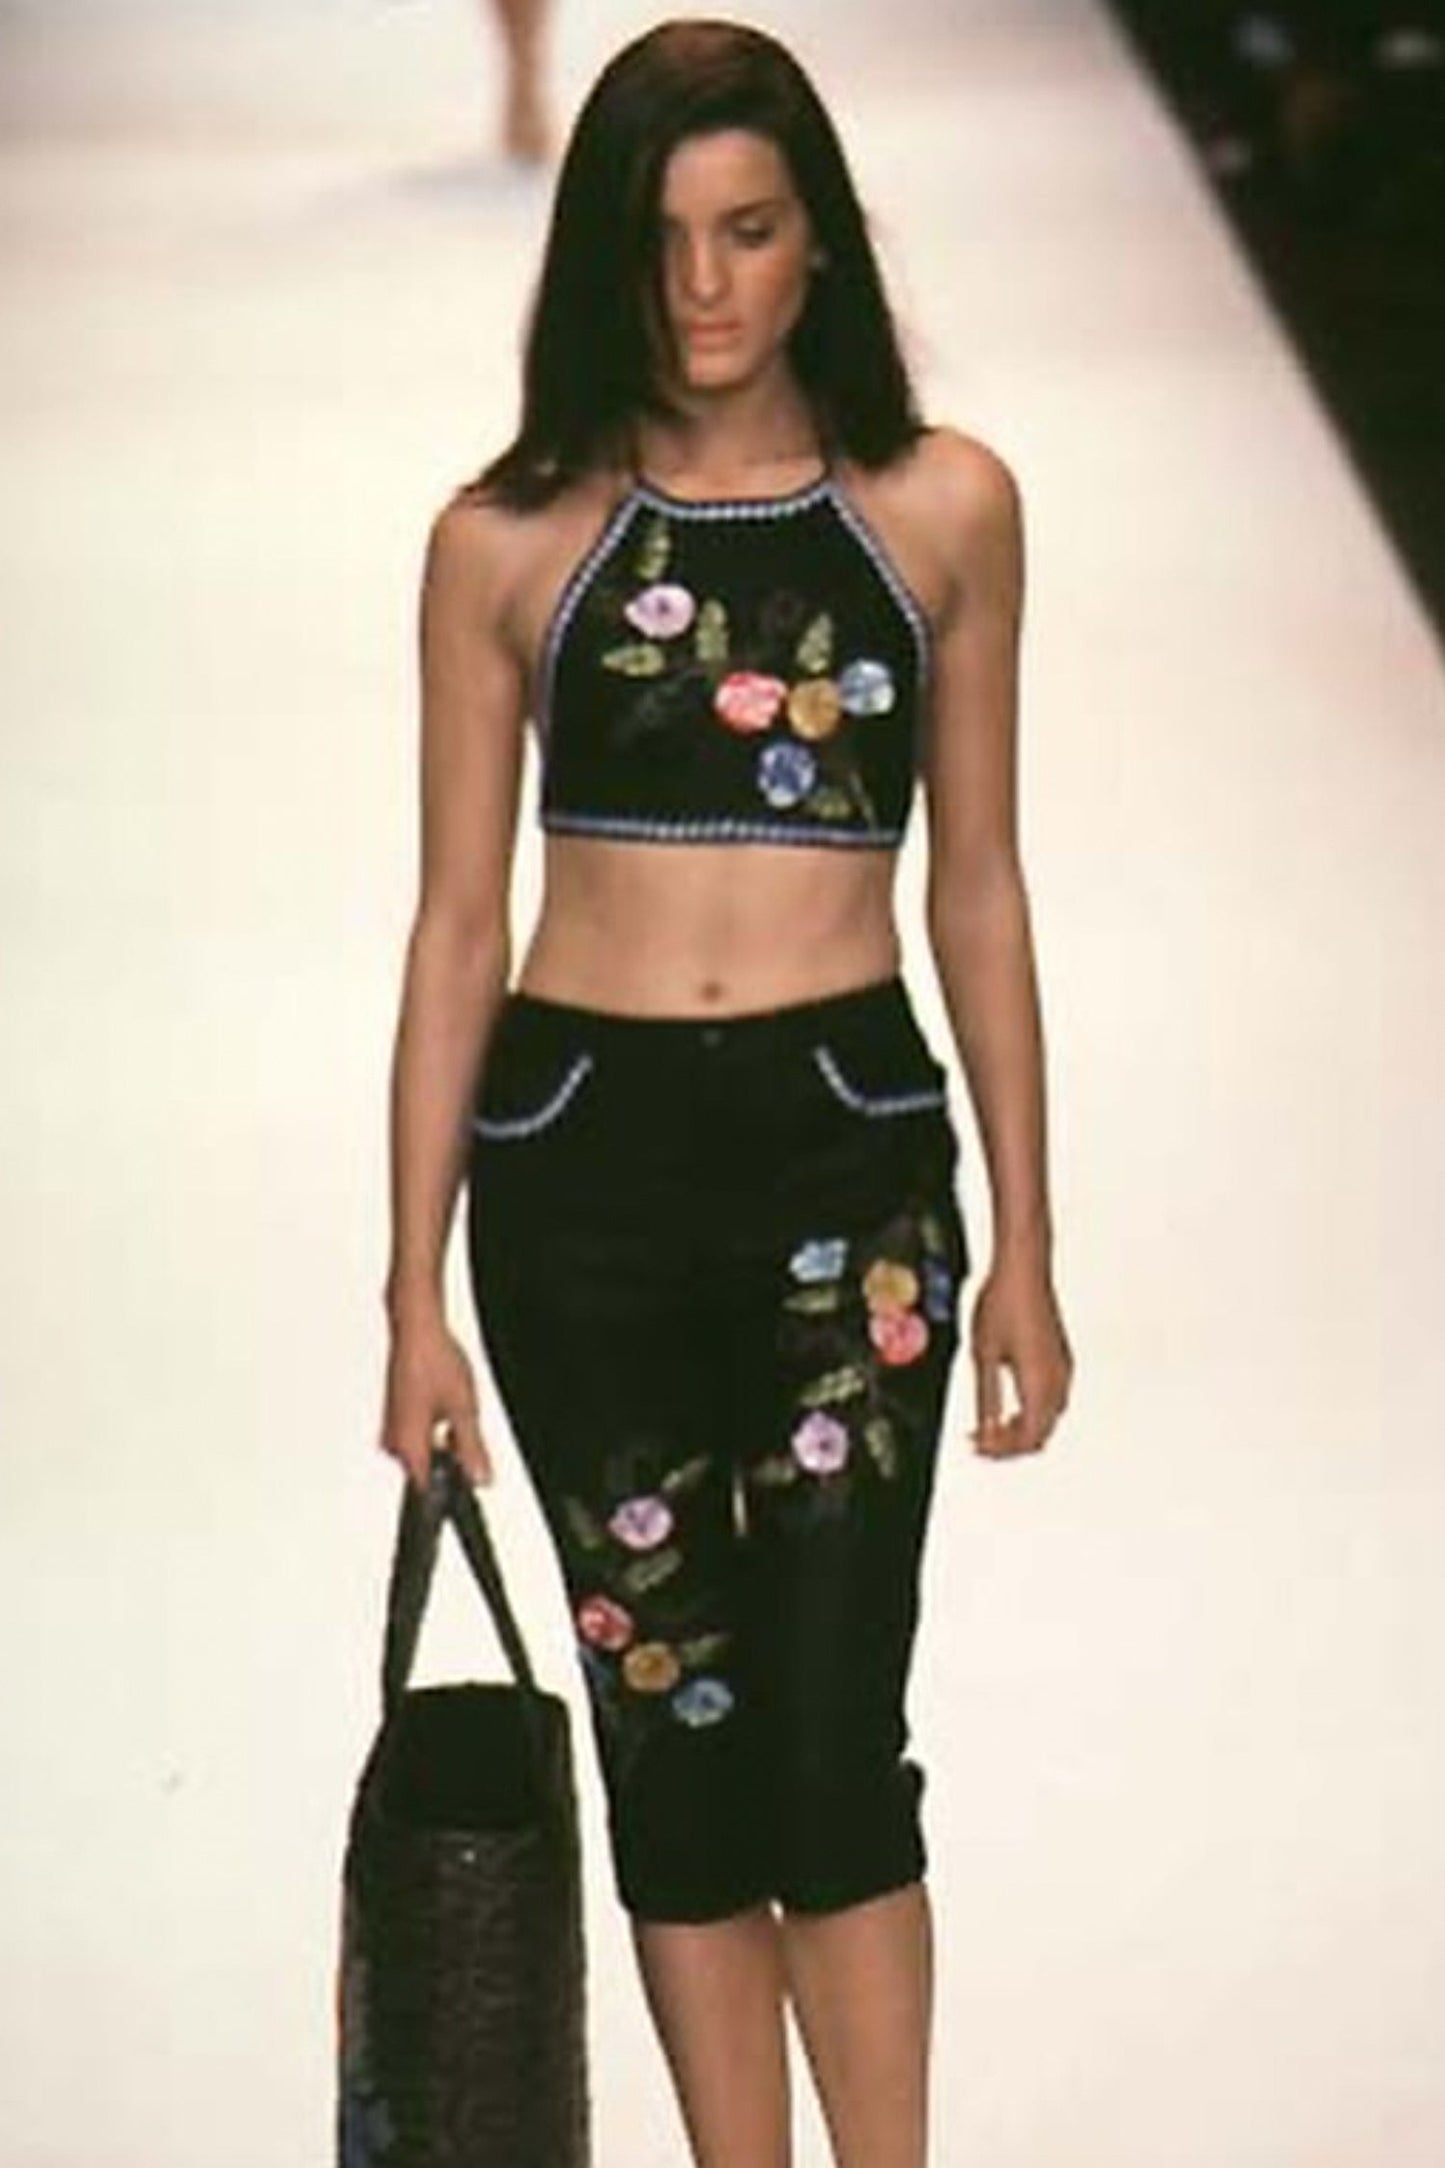 Under runway lights, 3-D Pansy Embroidered on Linen Skirt, baby blue hem, bouquets design on front